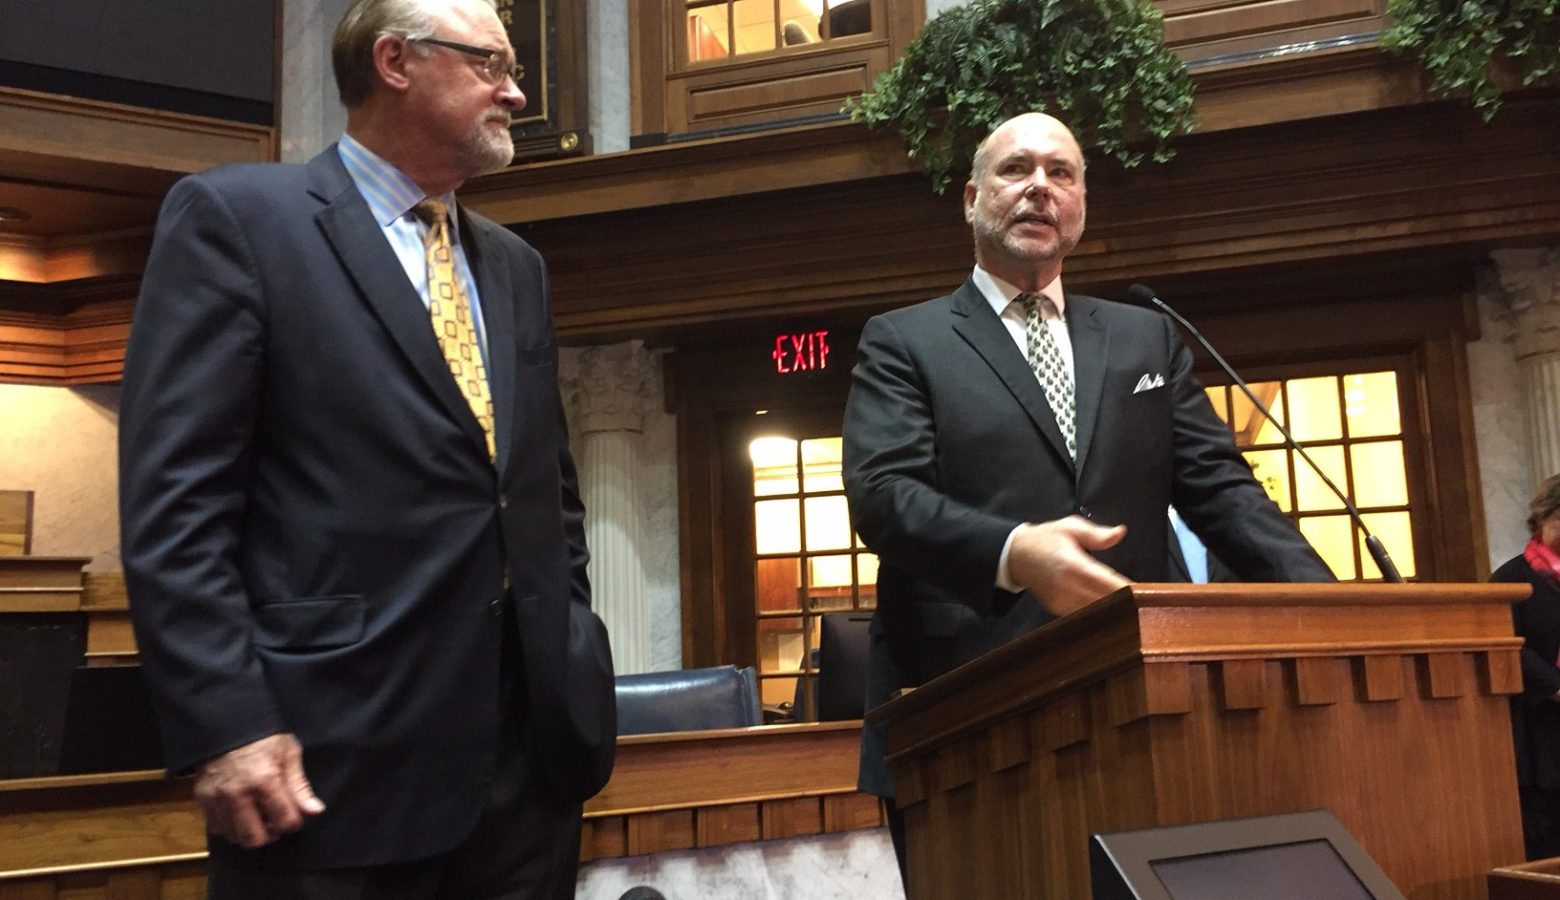 Senate President Pro Tem David Long (R-Fort Wayne), at left, looks on as Speaker Brian Bosma (R-Indianapolis) discusses Governor Eric Holcomb's first State of the State address. (Brandon Smith/IPB News)